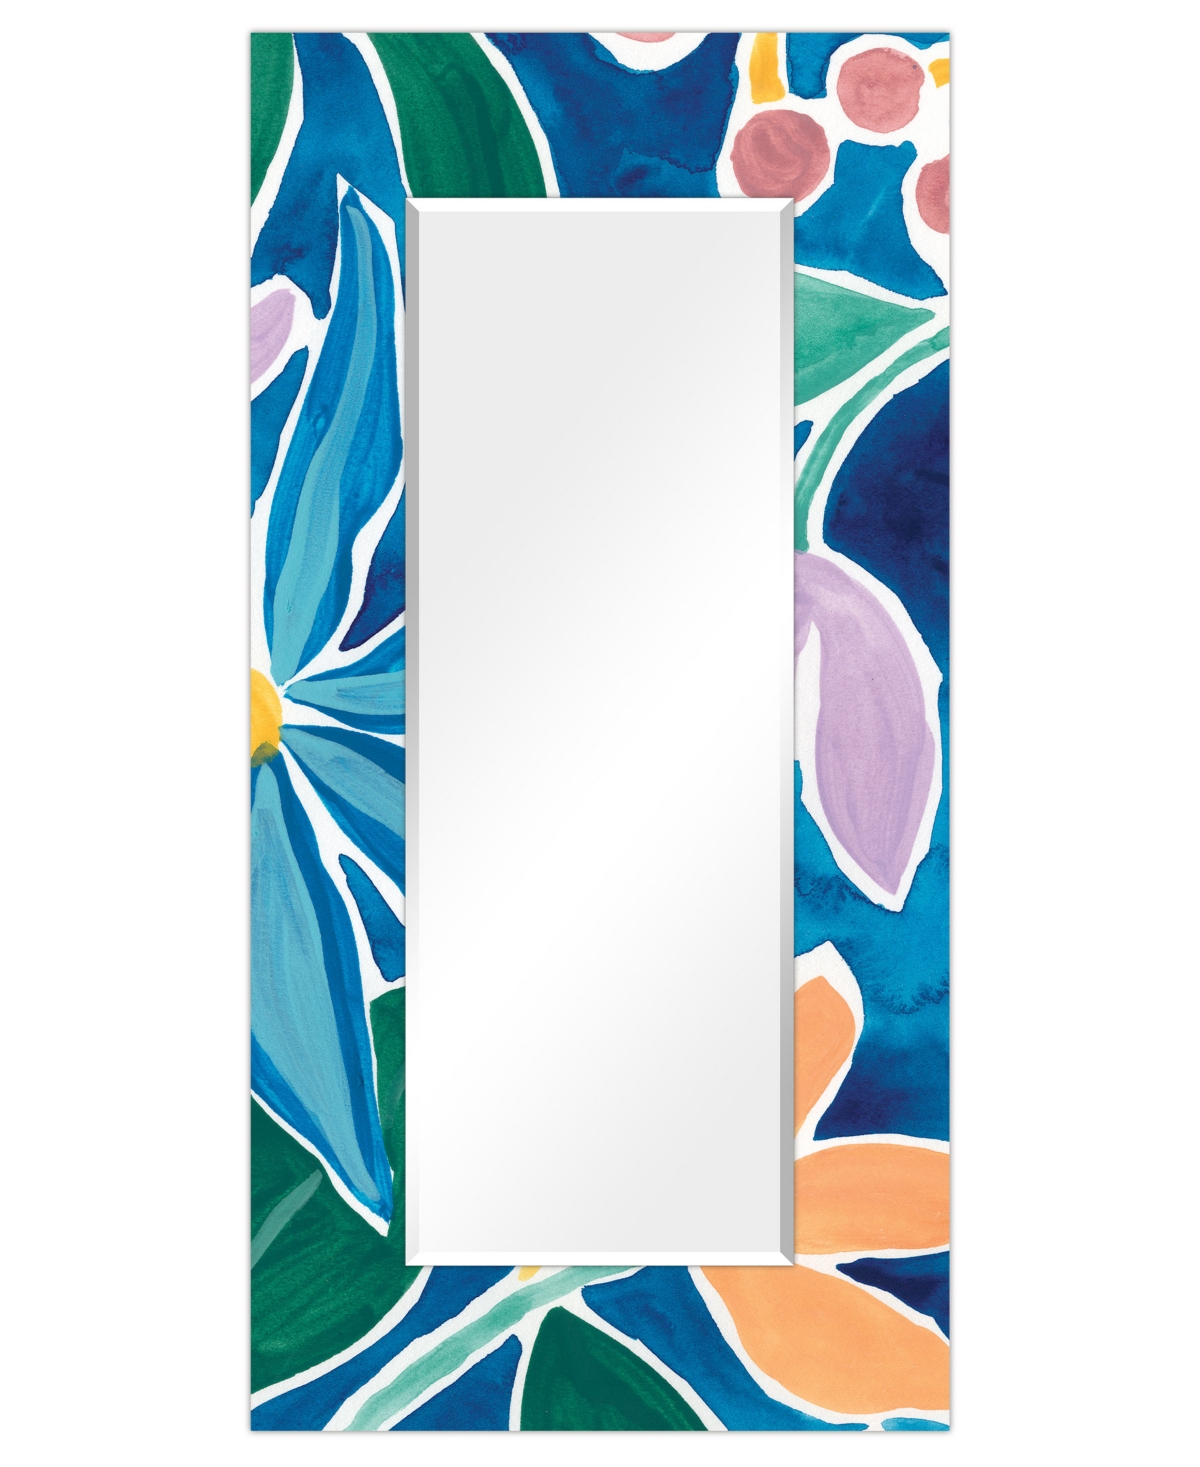 Empire Art Direct "tiki Square" Rectangular Beveled Mirror On Free Floating Printed Tempered Art Glass, 72" X 36" X 0. In Blue